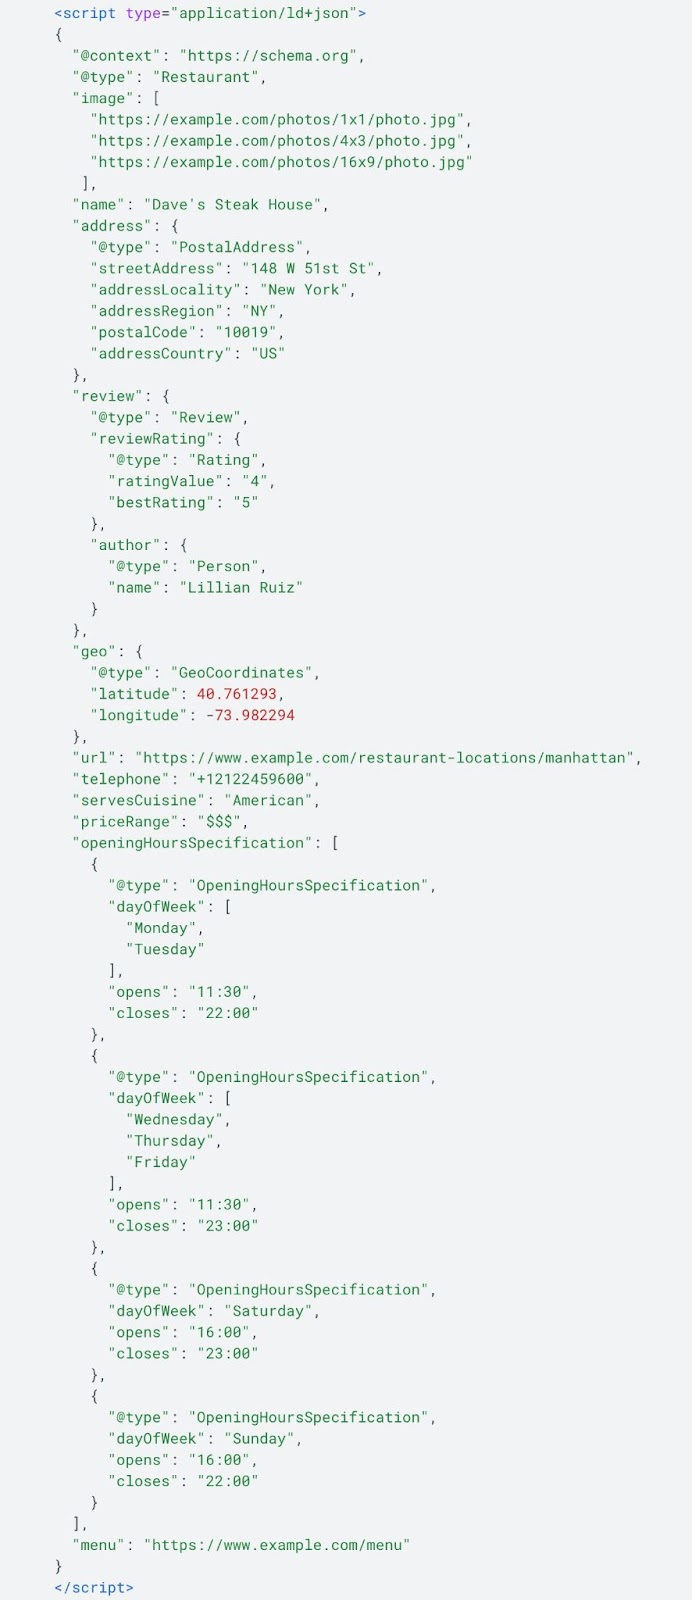 HTML of schema for a simple local business listing on Google using JSON-LD.